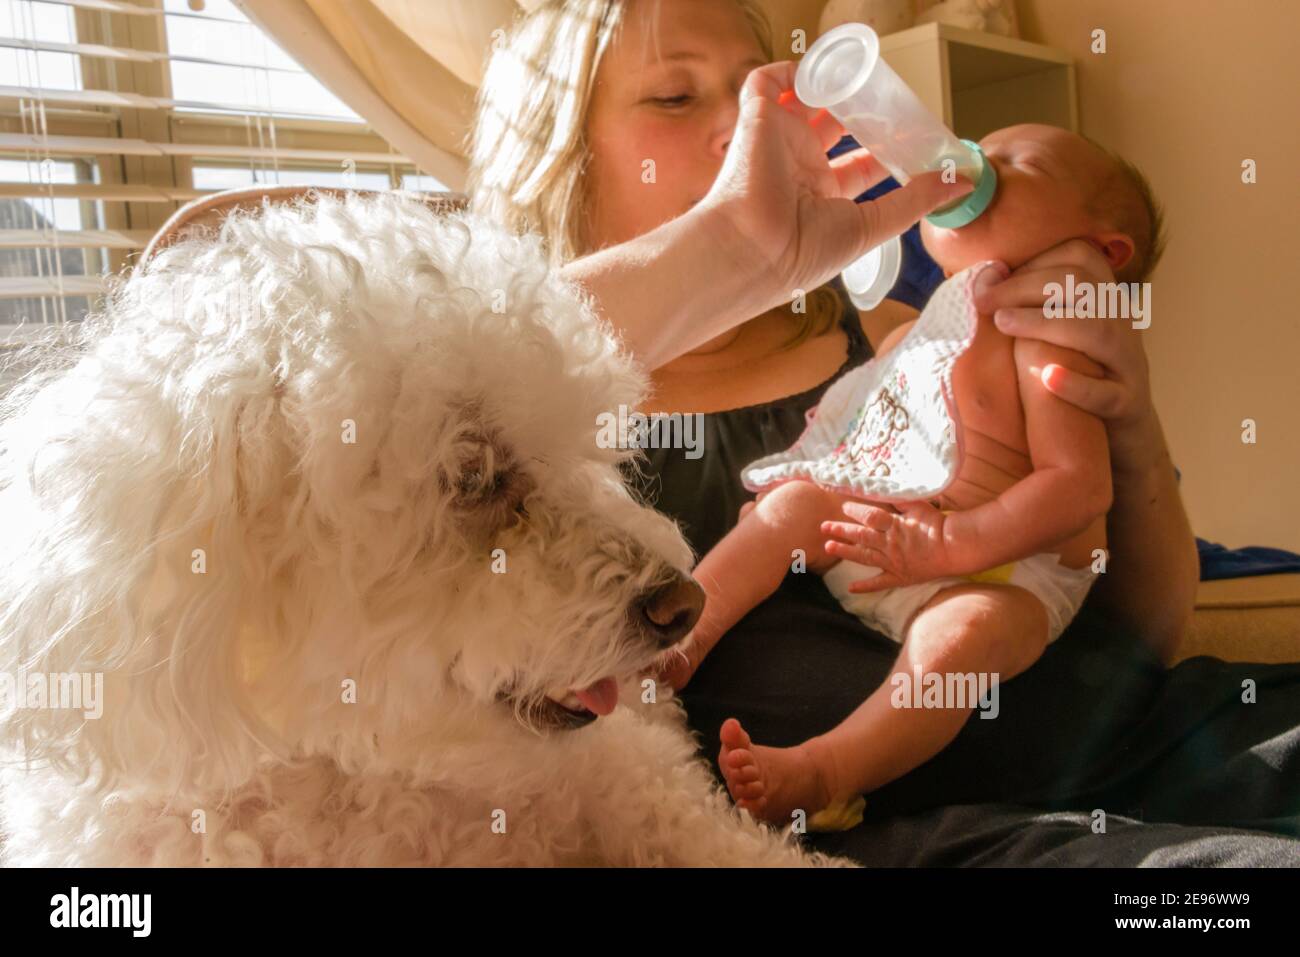 Mother feeding bottle to newborn baby girl in baby’s room with Bichon Frise dog in foreground. Stock Photo